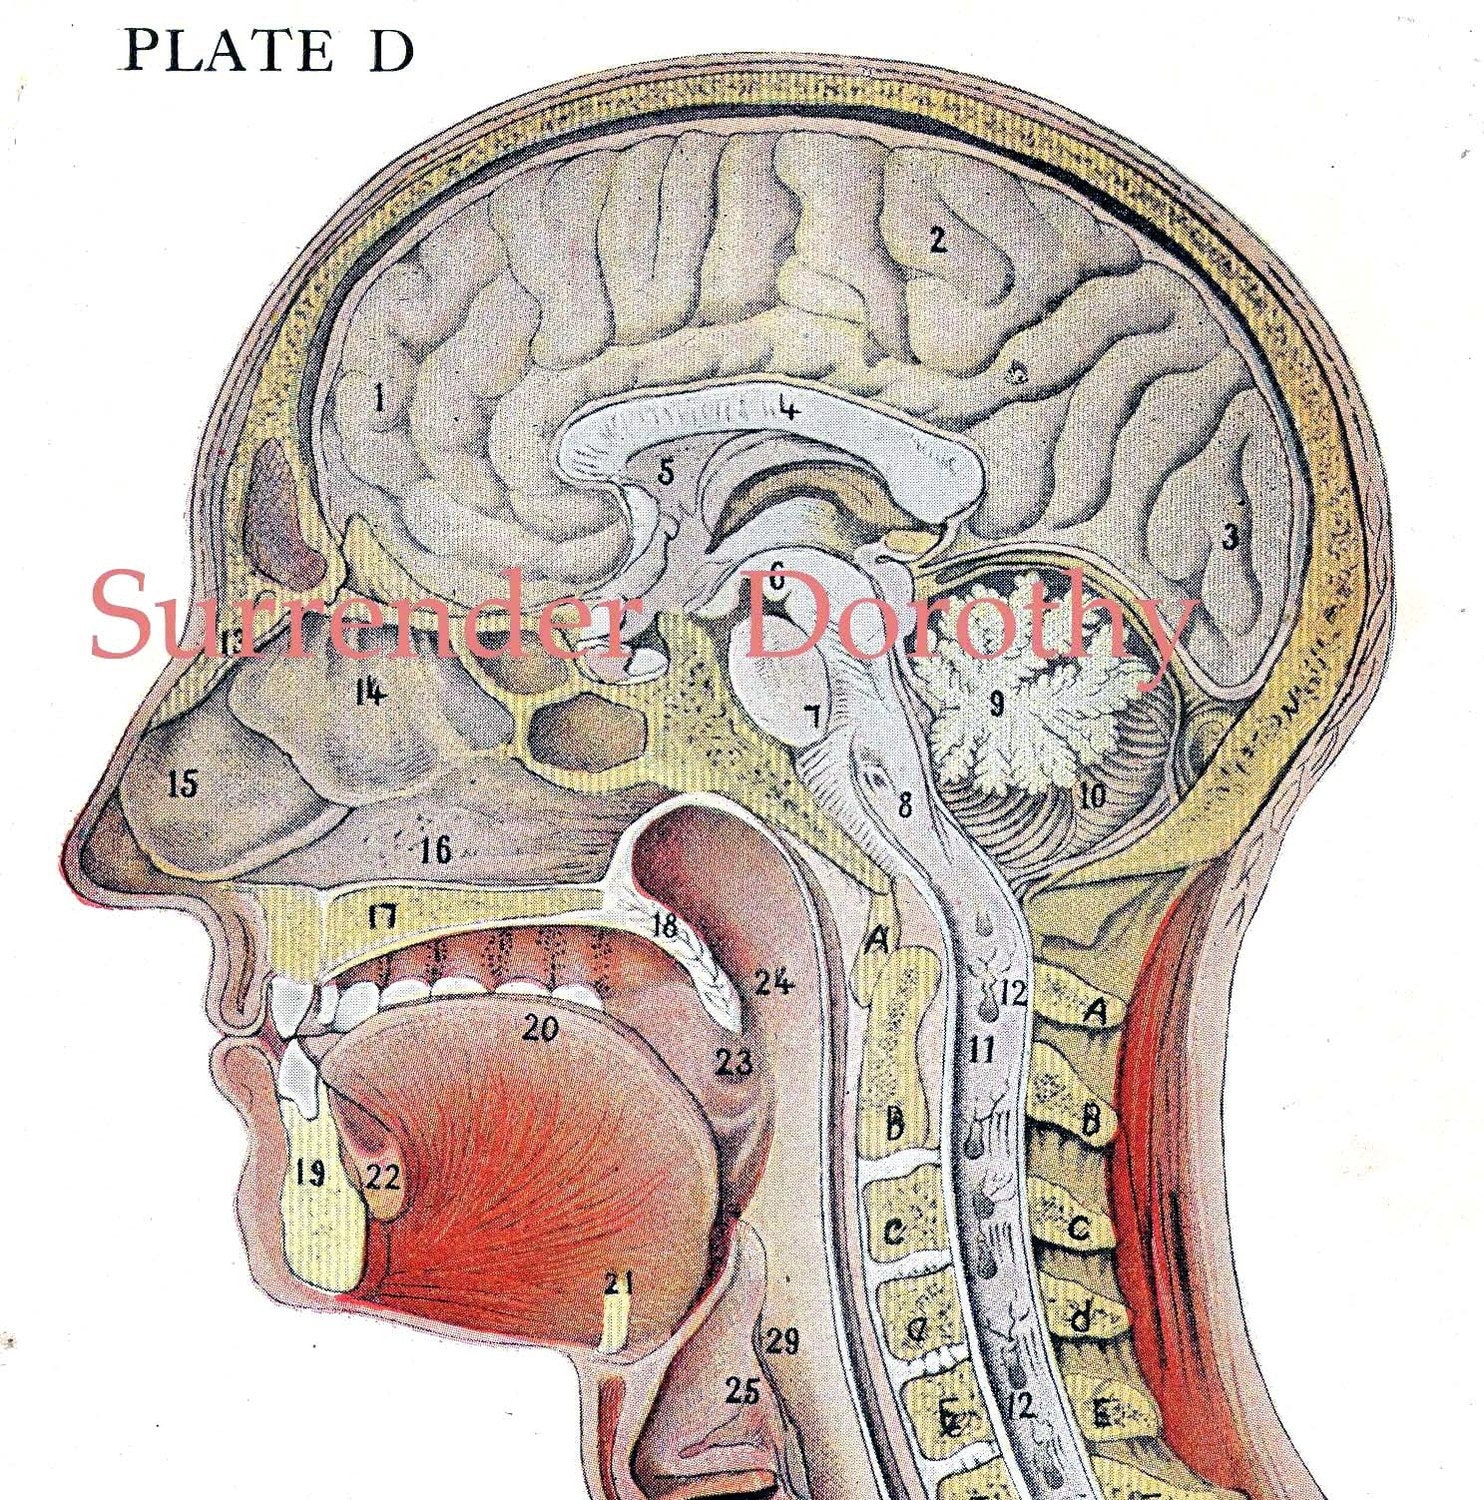 Cross-Section Human Head Brain Anatomy by SurrenderDorothy on Etsy